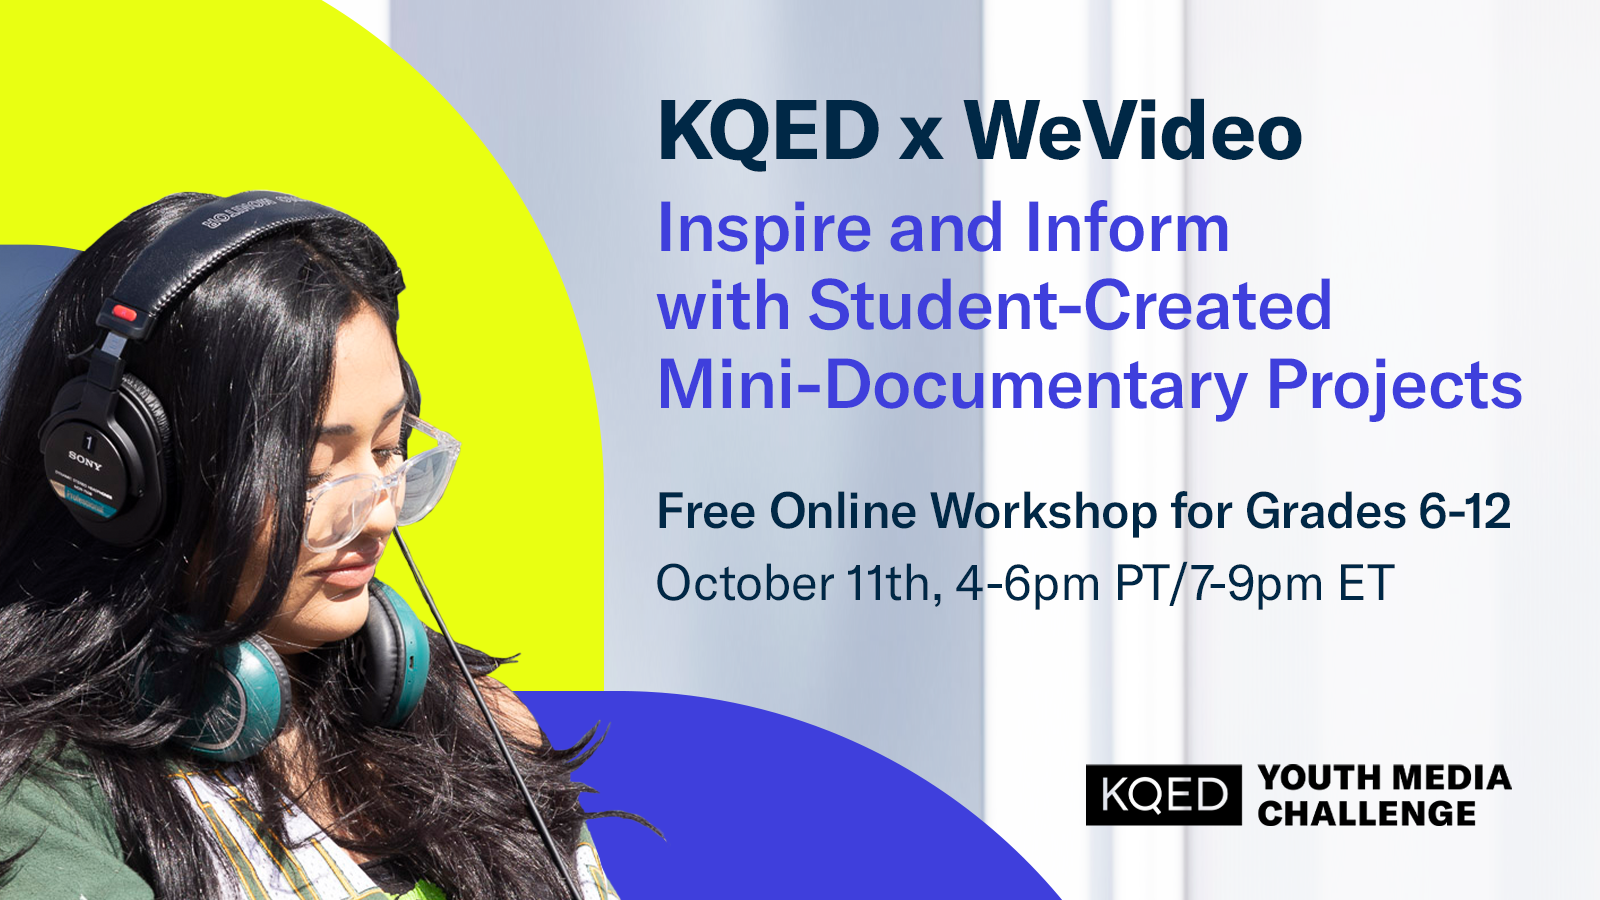 Event title: KQED x WeVideo: Inspire and Inform with Student-Created Mini-Documentary Projects. Photo of a woman wearing headphones